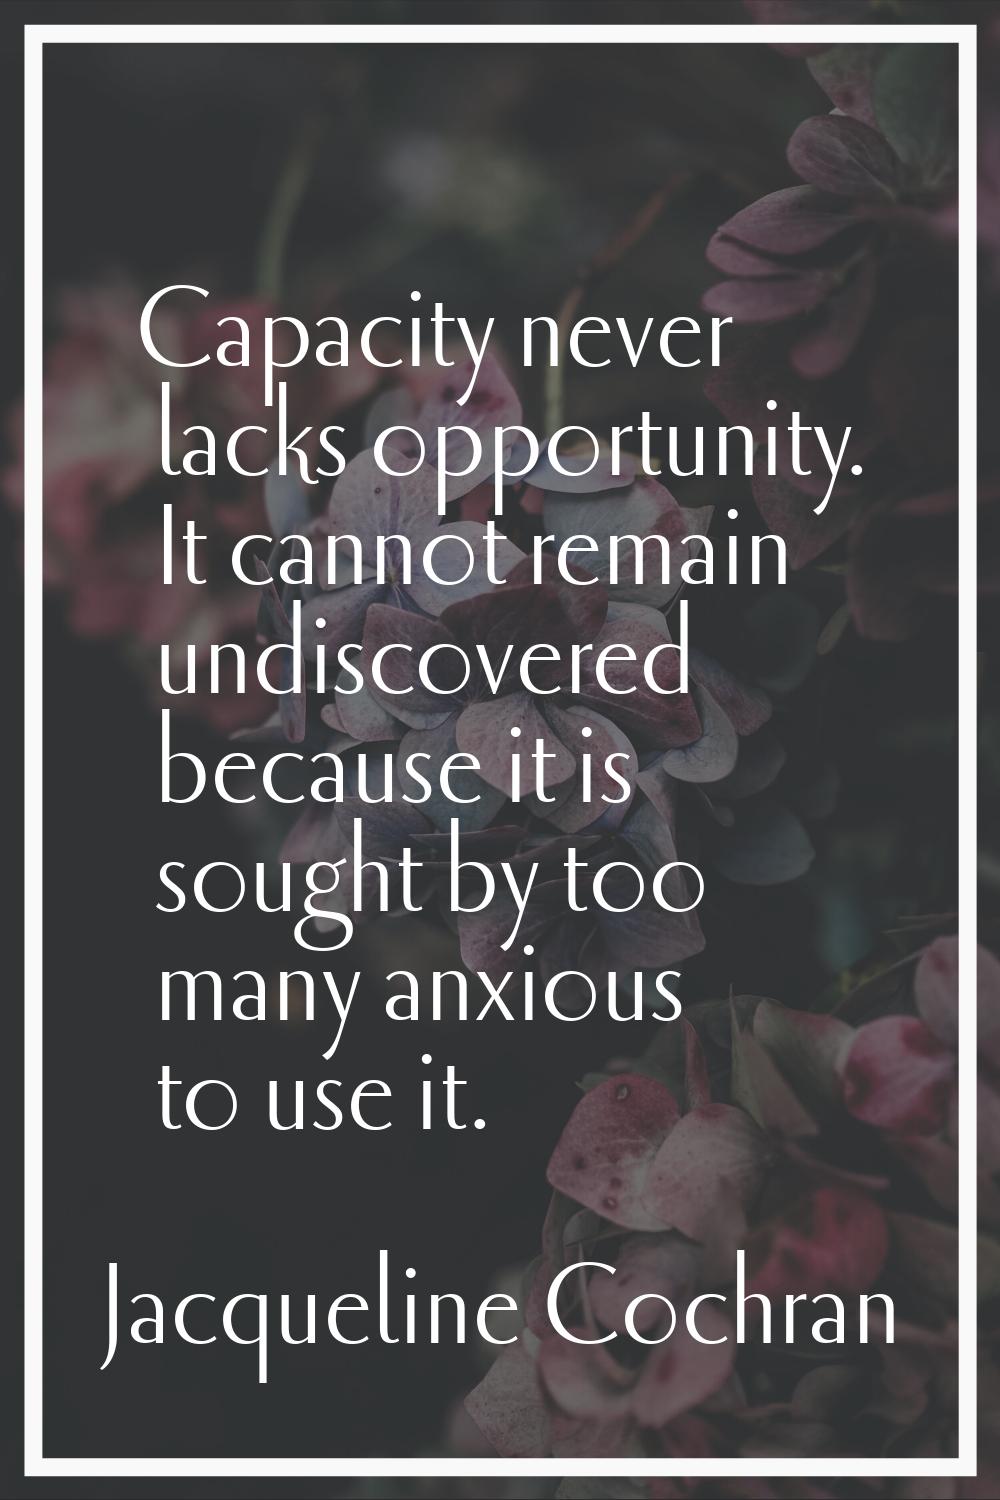 Capacity never lacks opportunity. It cannot remain undiscovered because it is sought by too many an